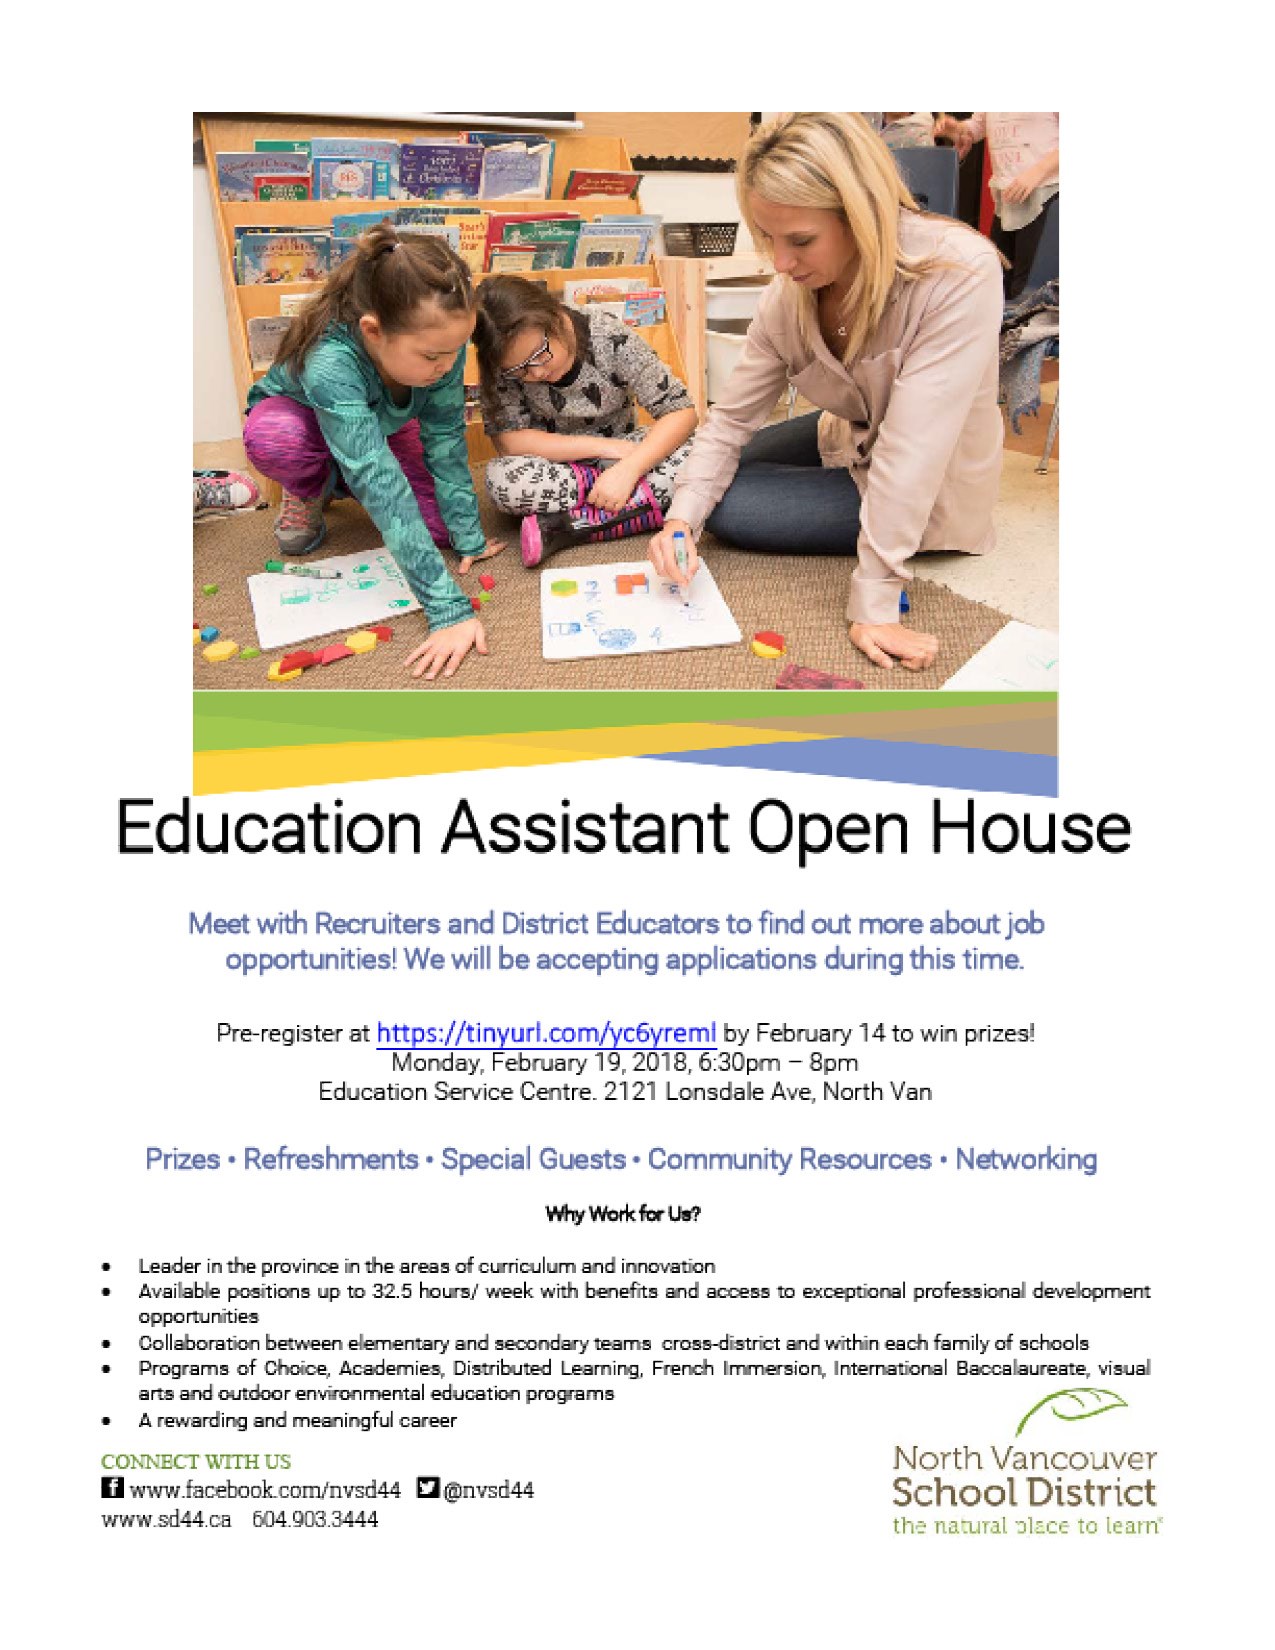 Education Assistant OPEN HOUSE POSTER JPEG2.jpg